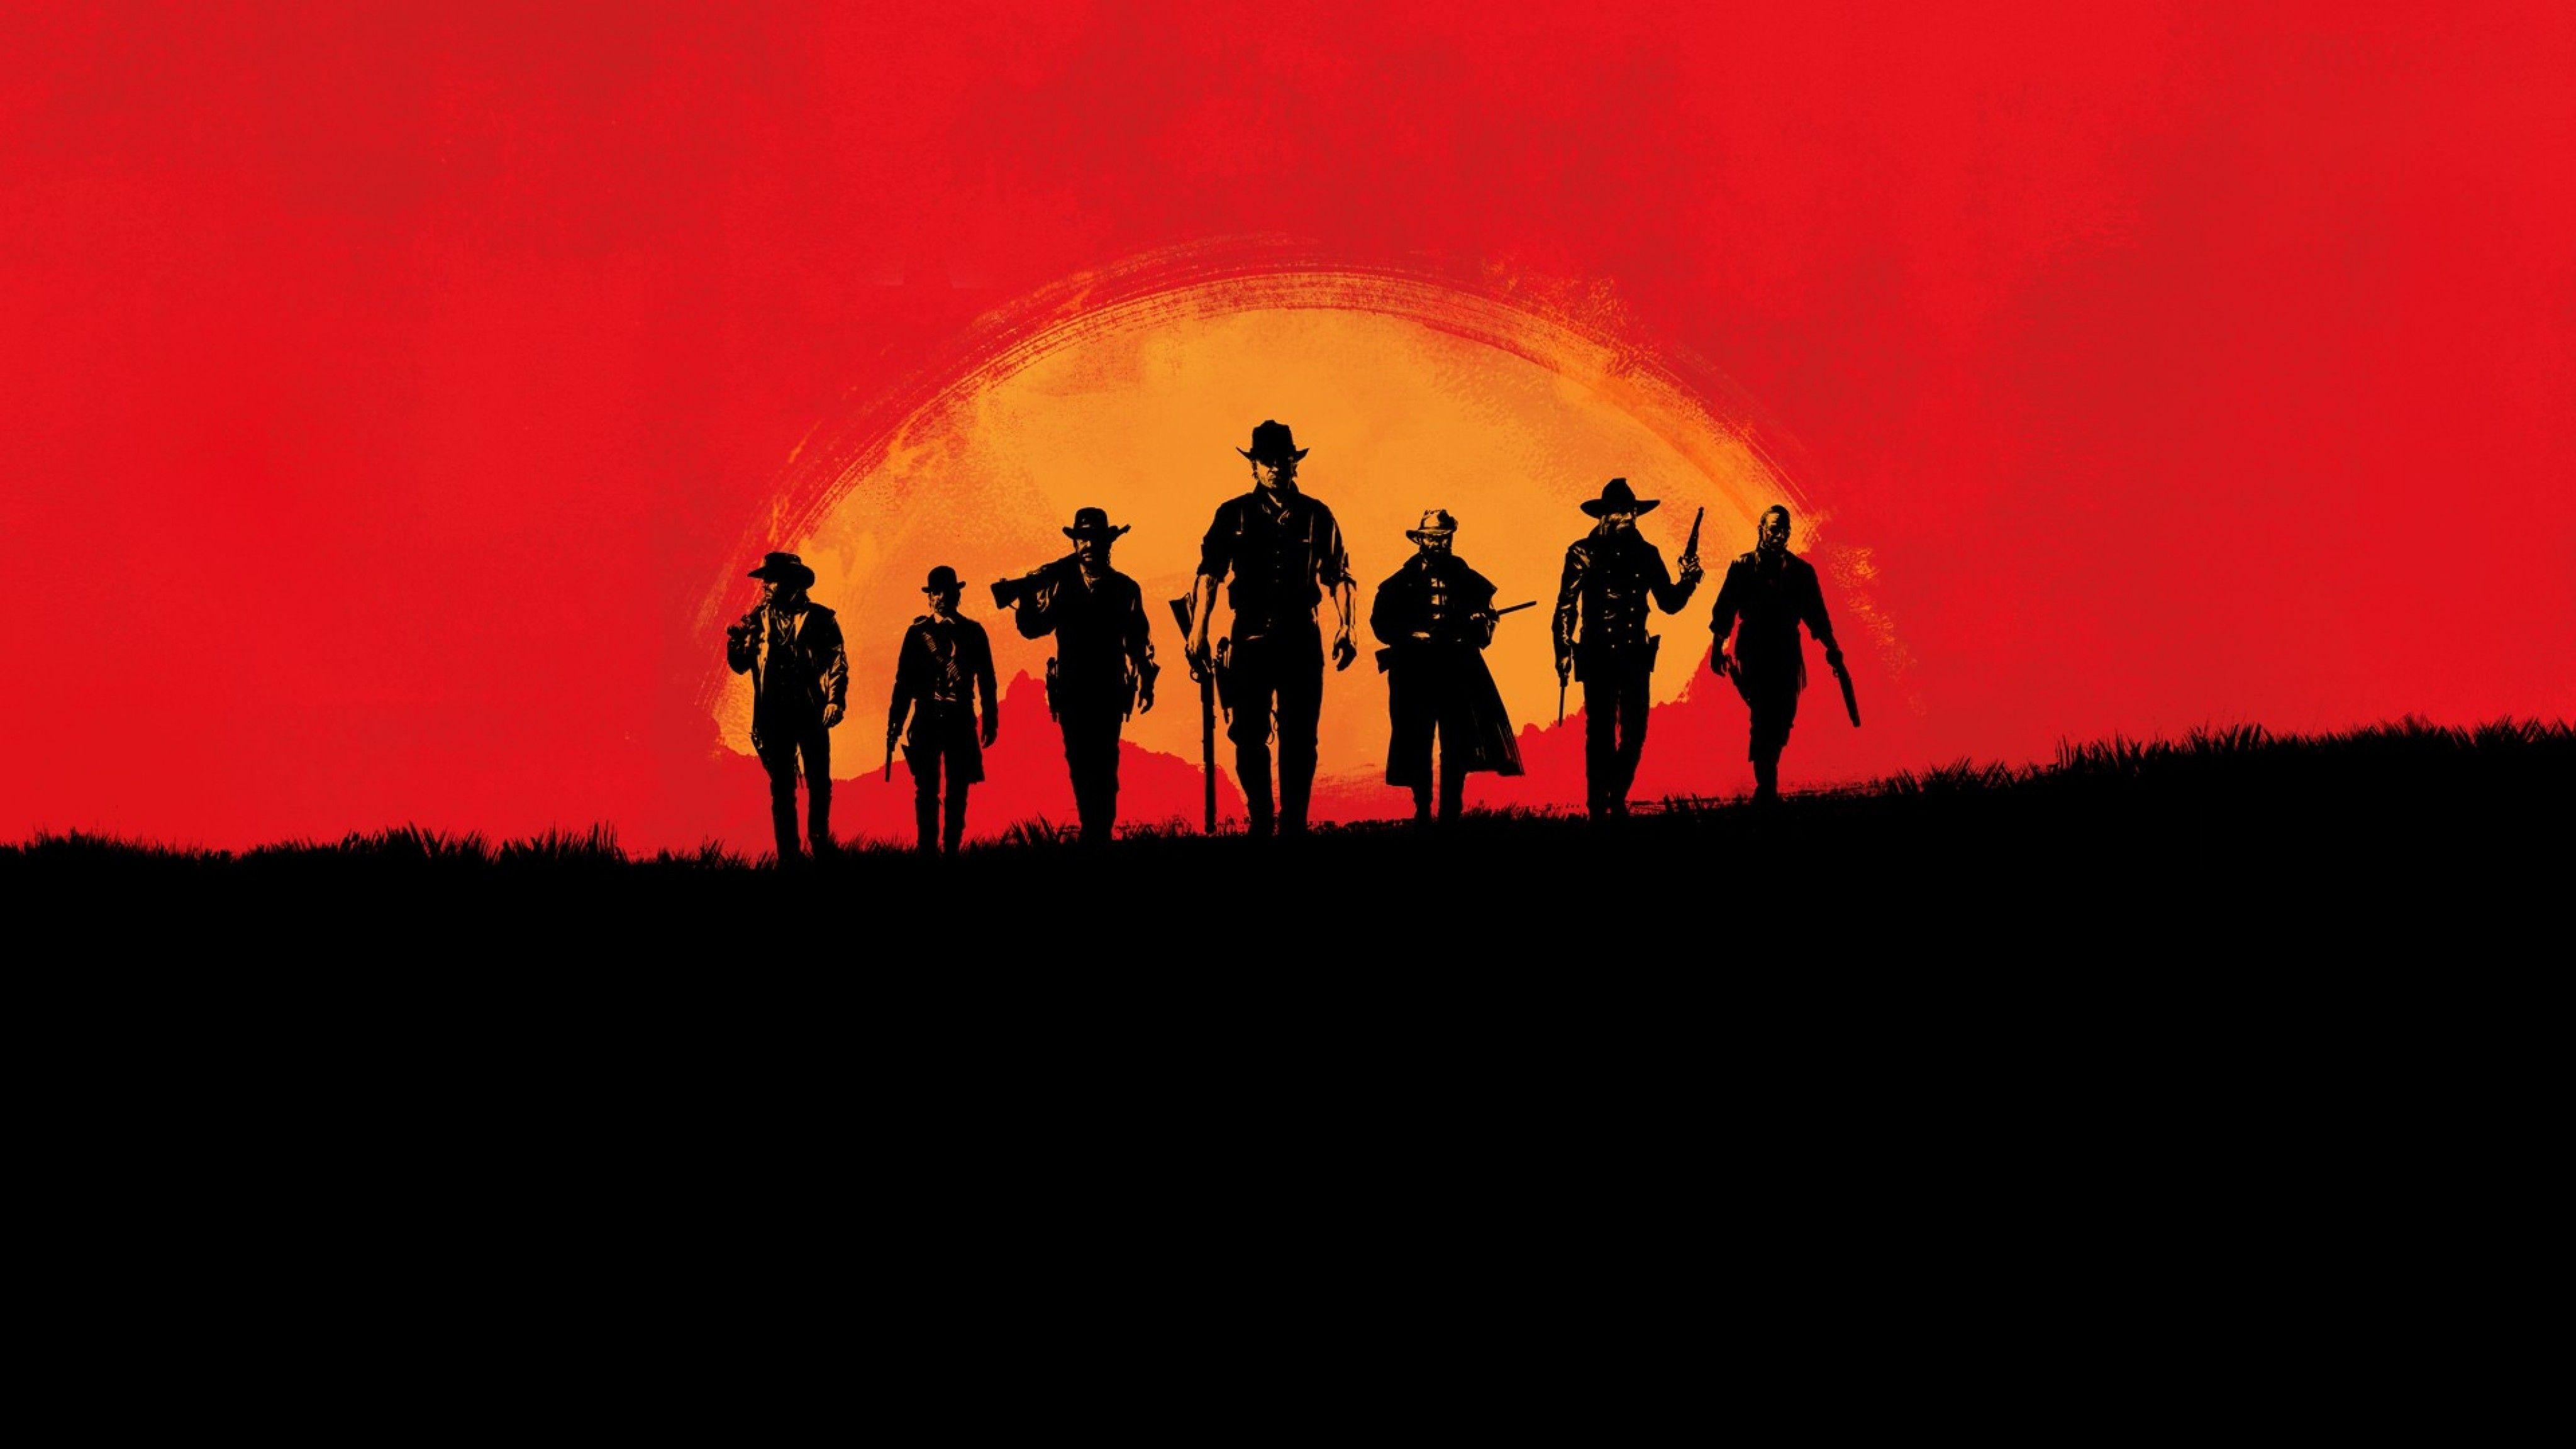 RDR2 Wallpapers and Backgrounds